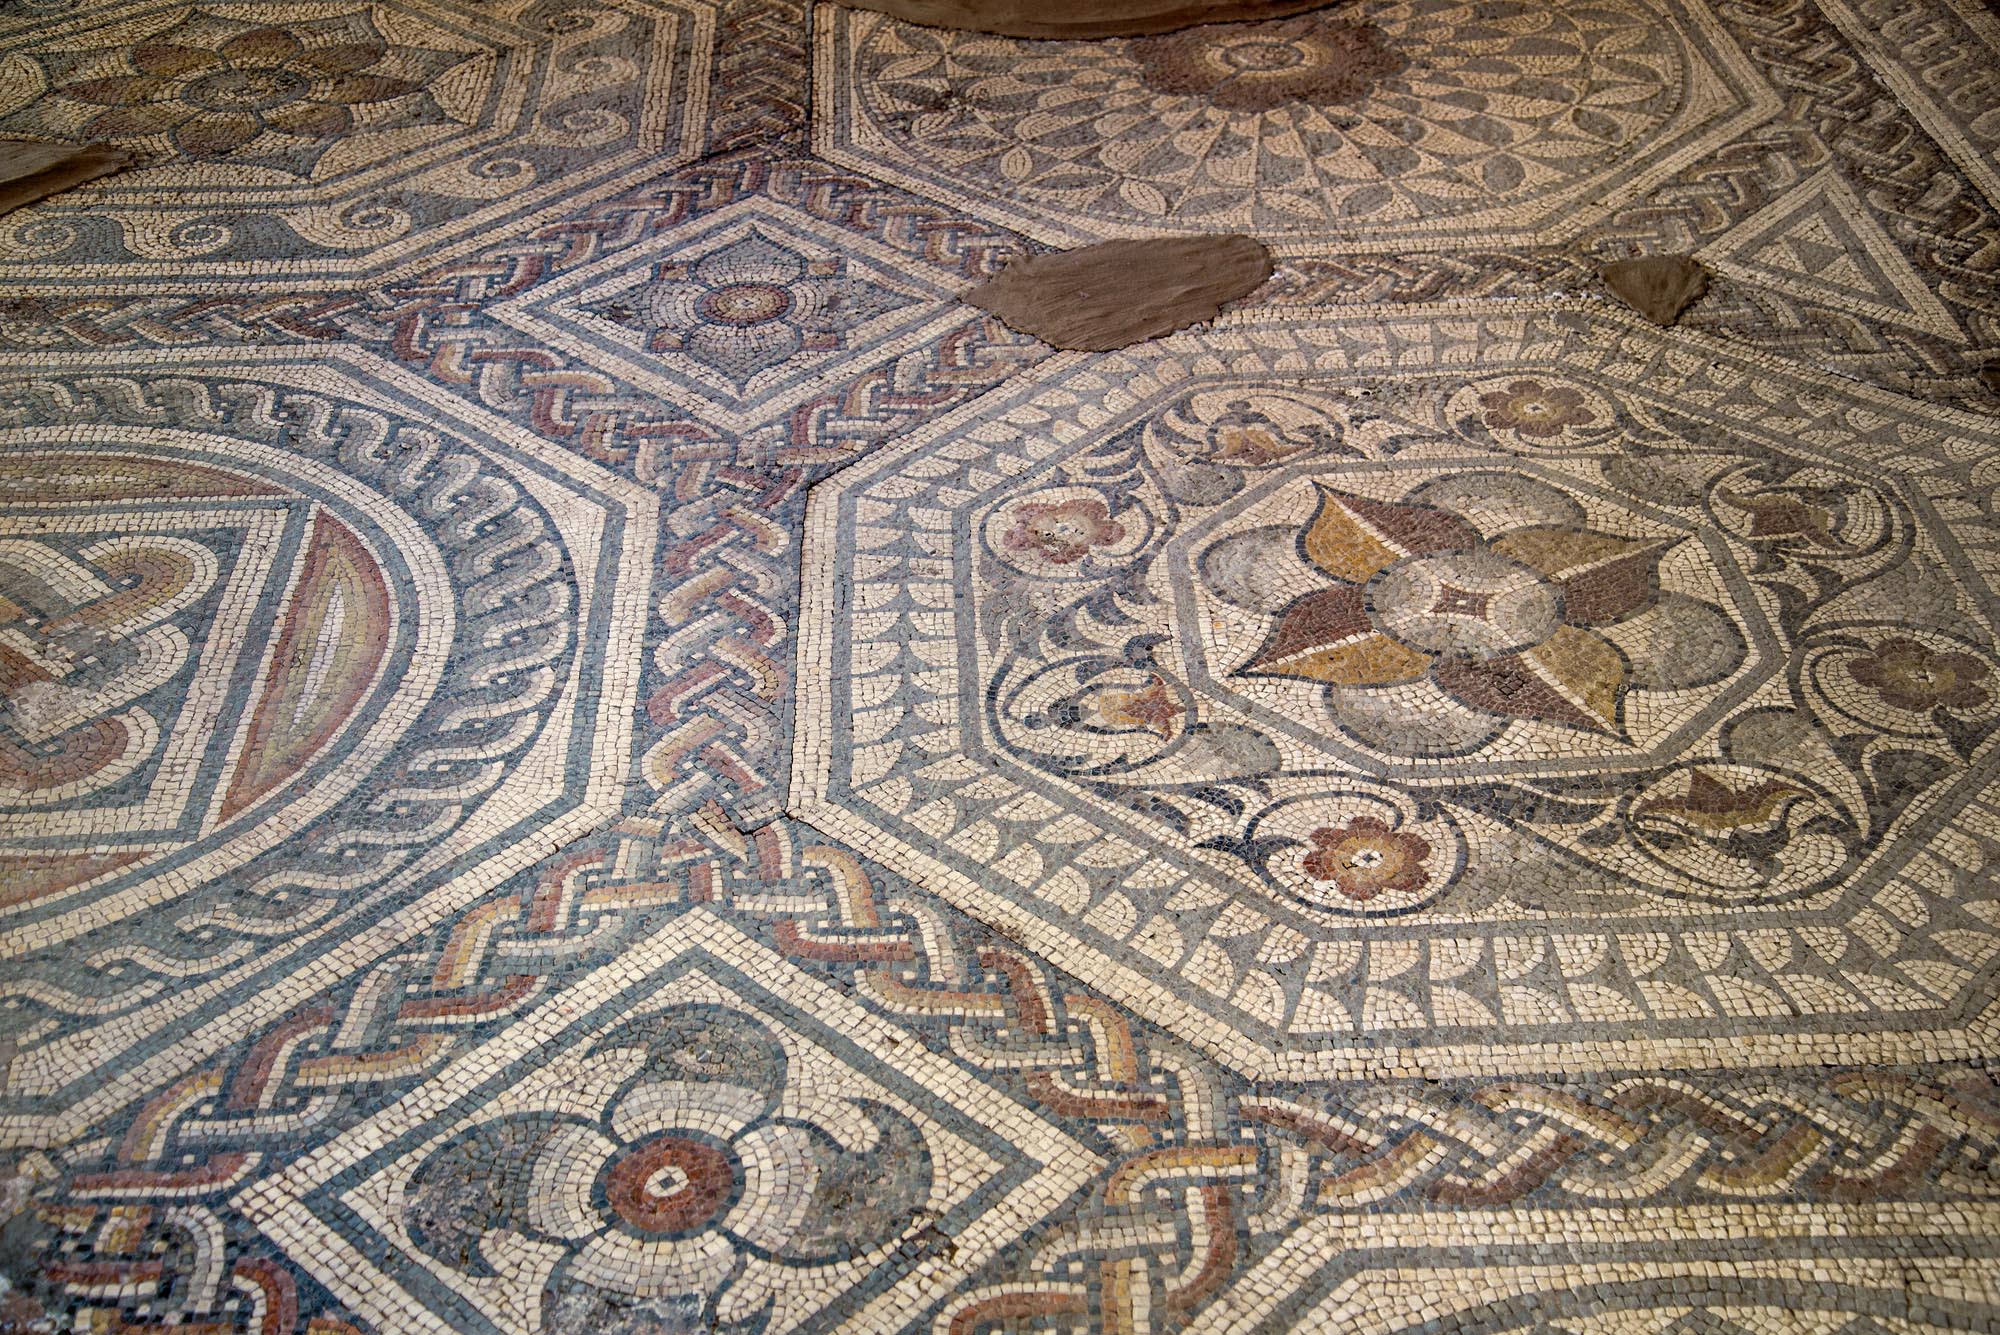 The 2nd century Roman mosaic floor that was visible under the station -